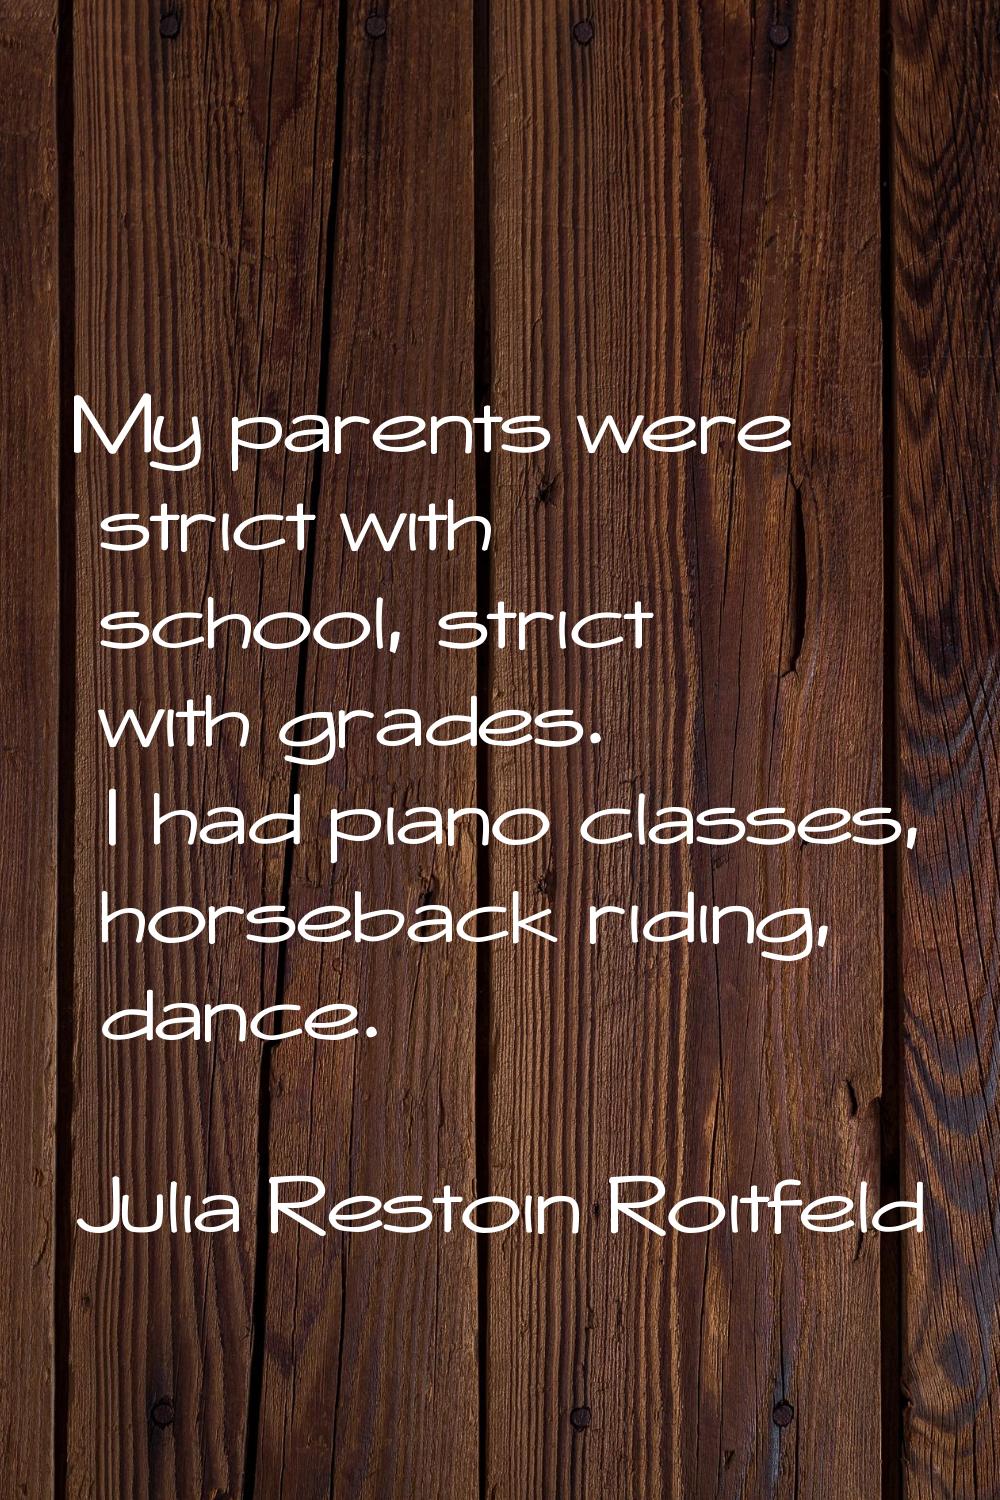 My parents were strict with school, strict with grades. I had piano classes, horseback riding, danc